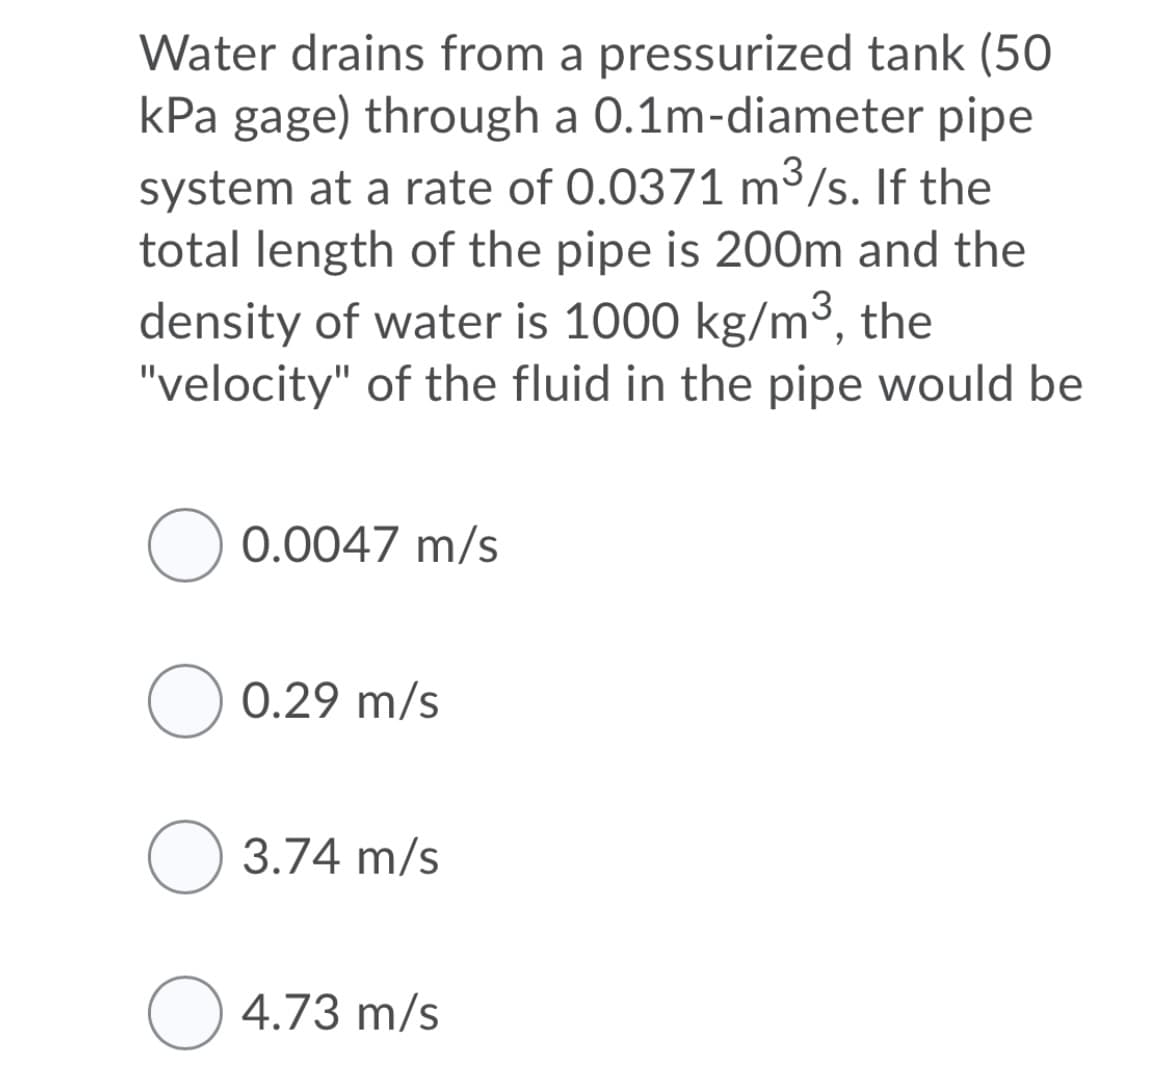 Water drains from a pressurized tank (50
kPa gage) through a 0.1m-diameter pipe
system at a rate of 0.0371 m³/s. If the
total length of the pipe is 200m and the
density of water is 1000 kg/m³, the
"velocity" of the fluid in the pipe would be
O 0.0047 m/s
O 0.29 m/s
O 3.74 m/s
O 4.73 m/s
